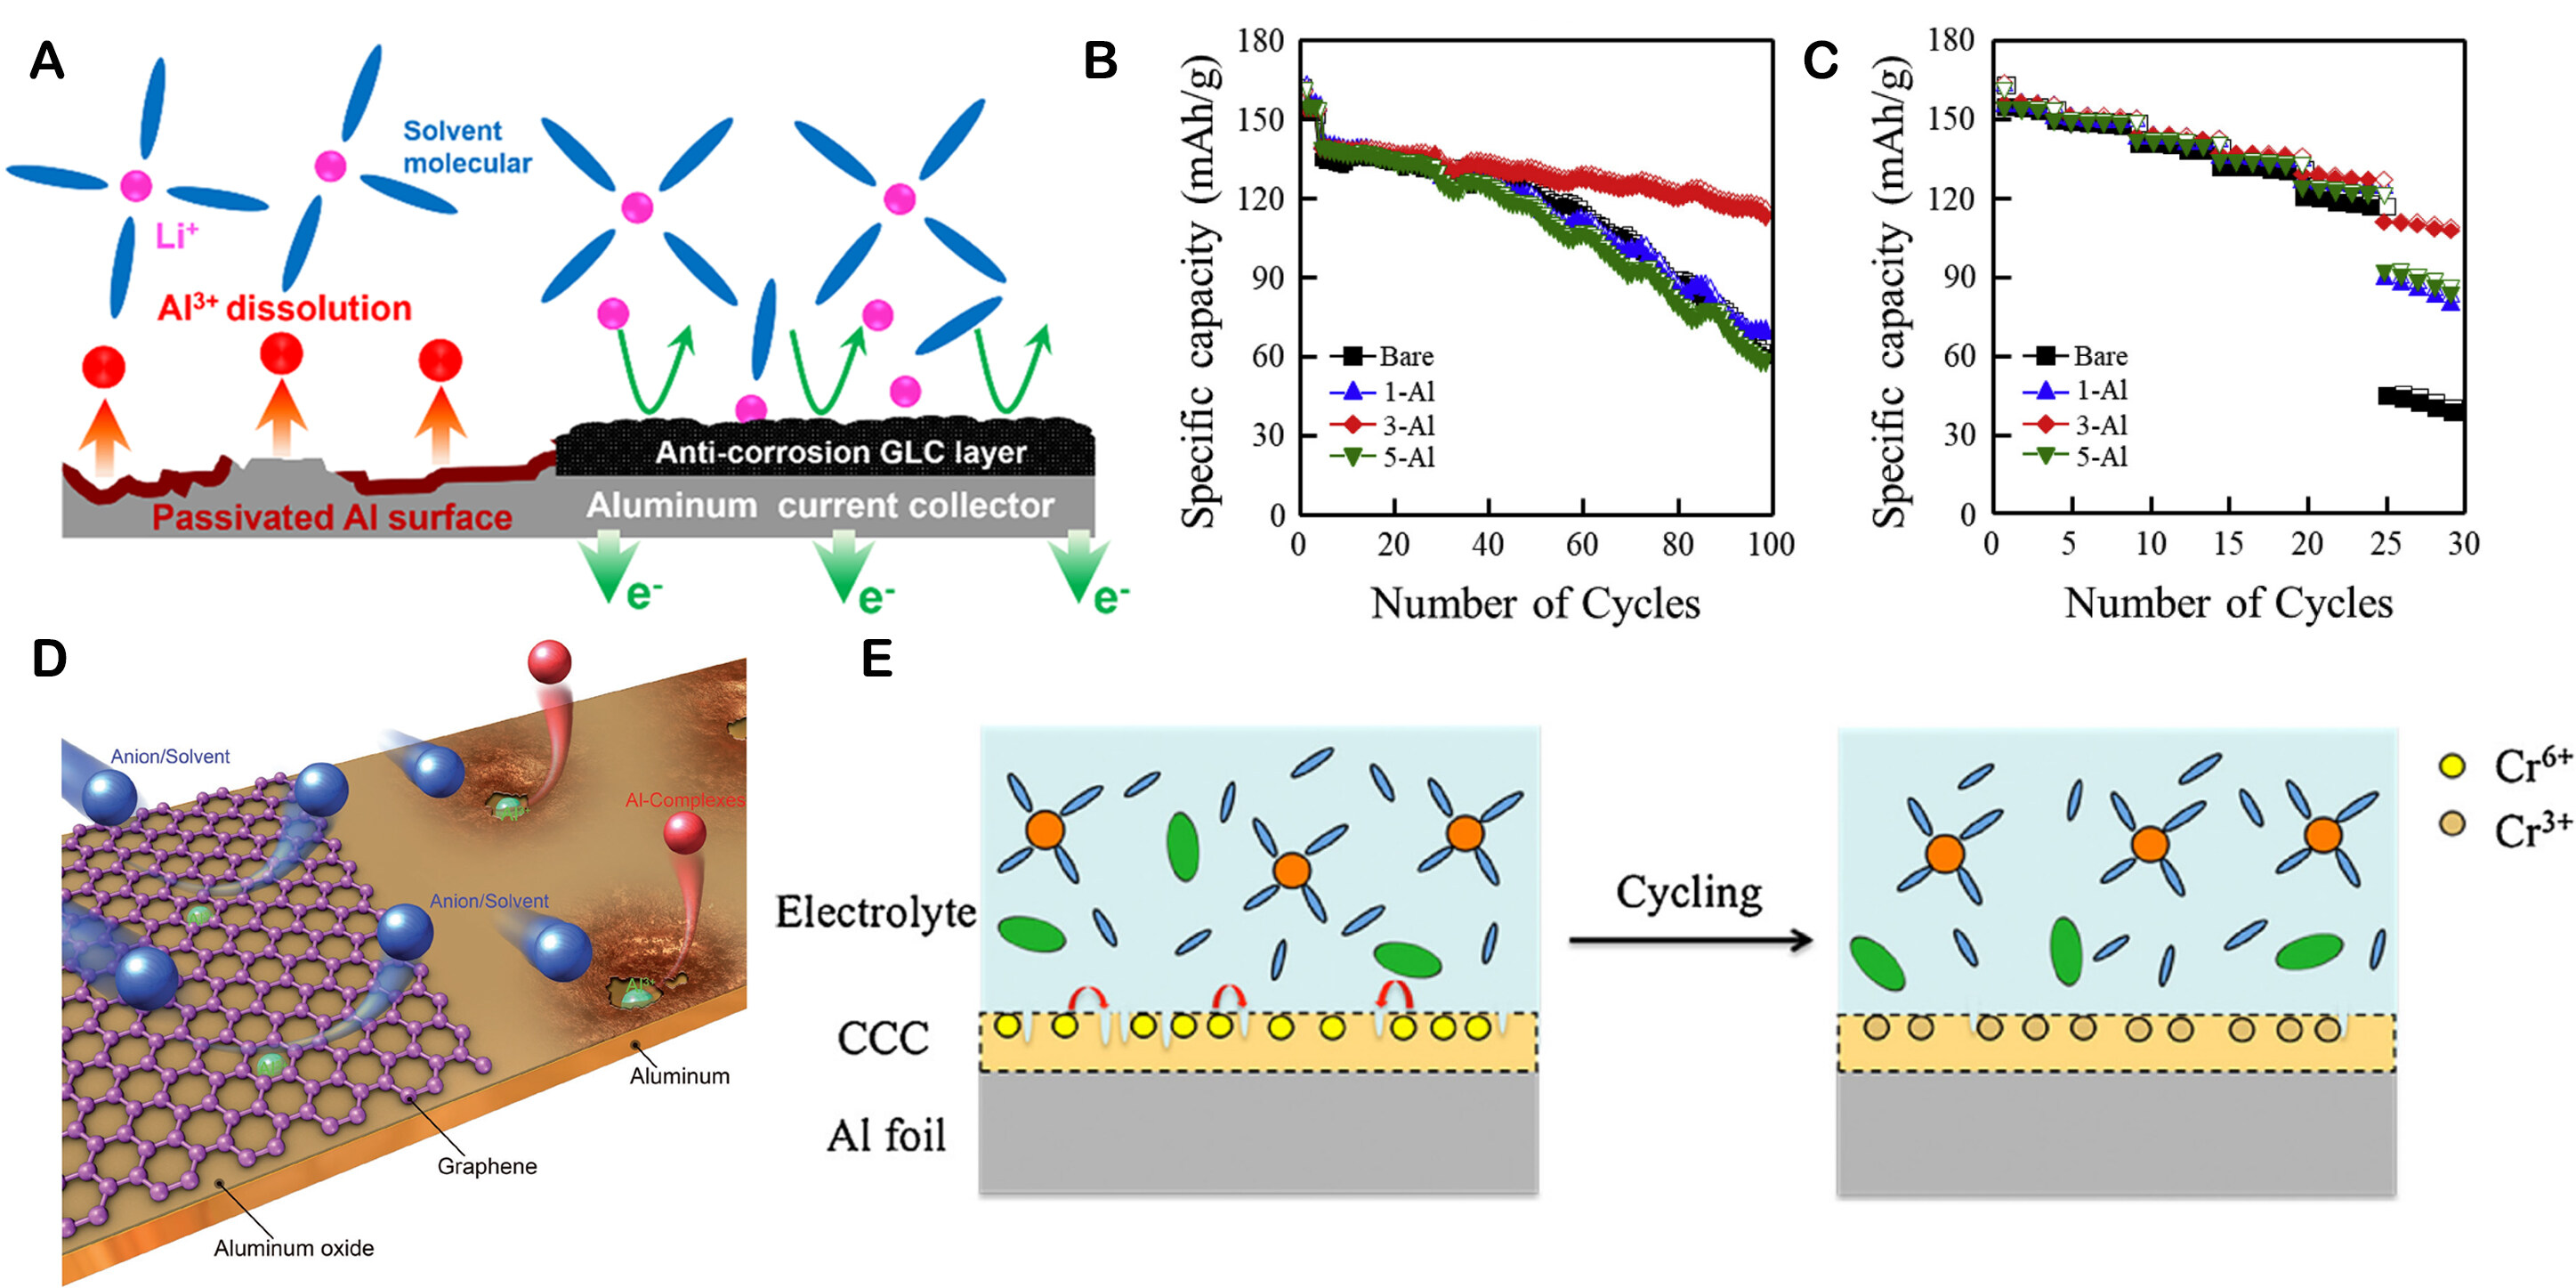 Strategies towards inhibition of aluminum current collector corrosion in lithium batteries